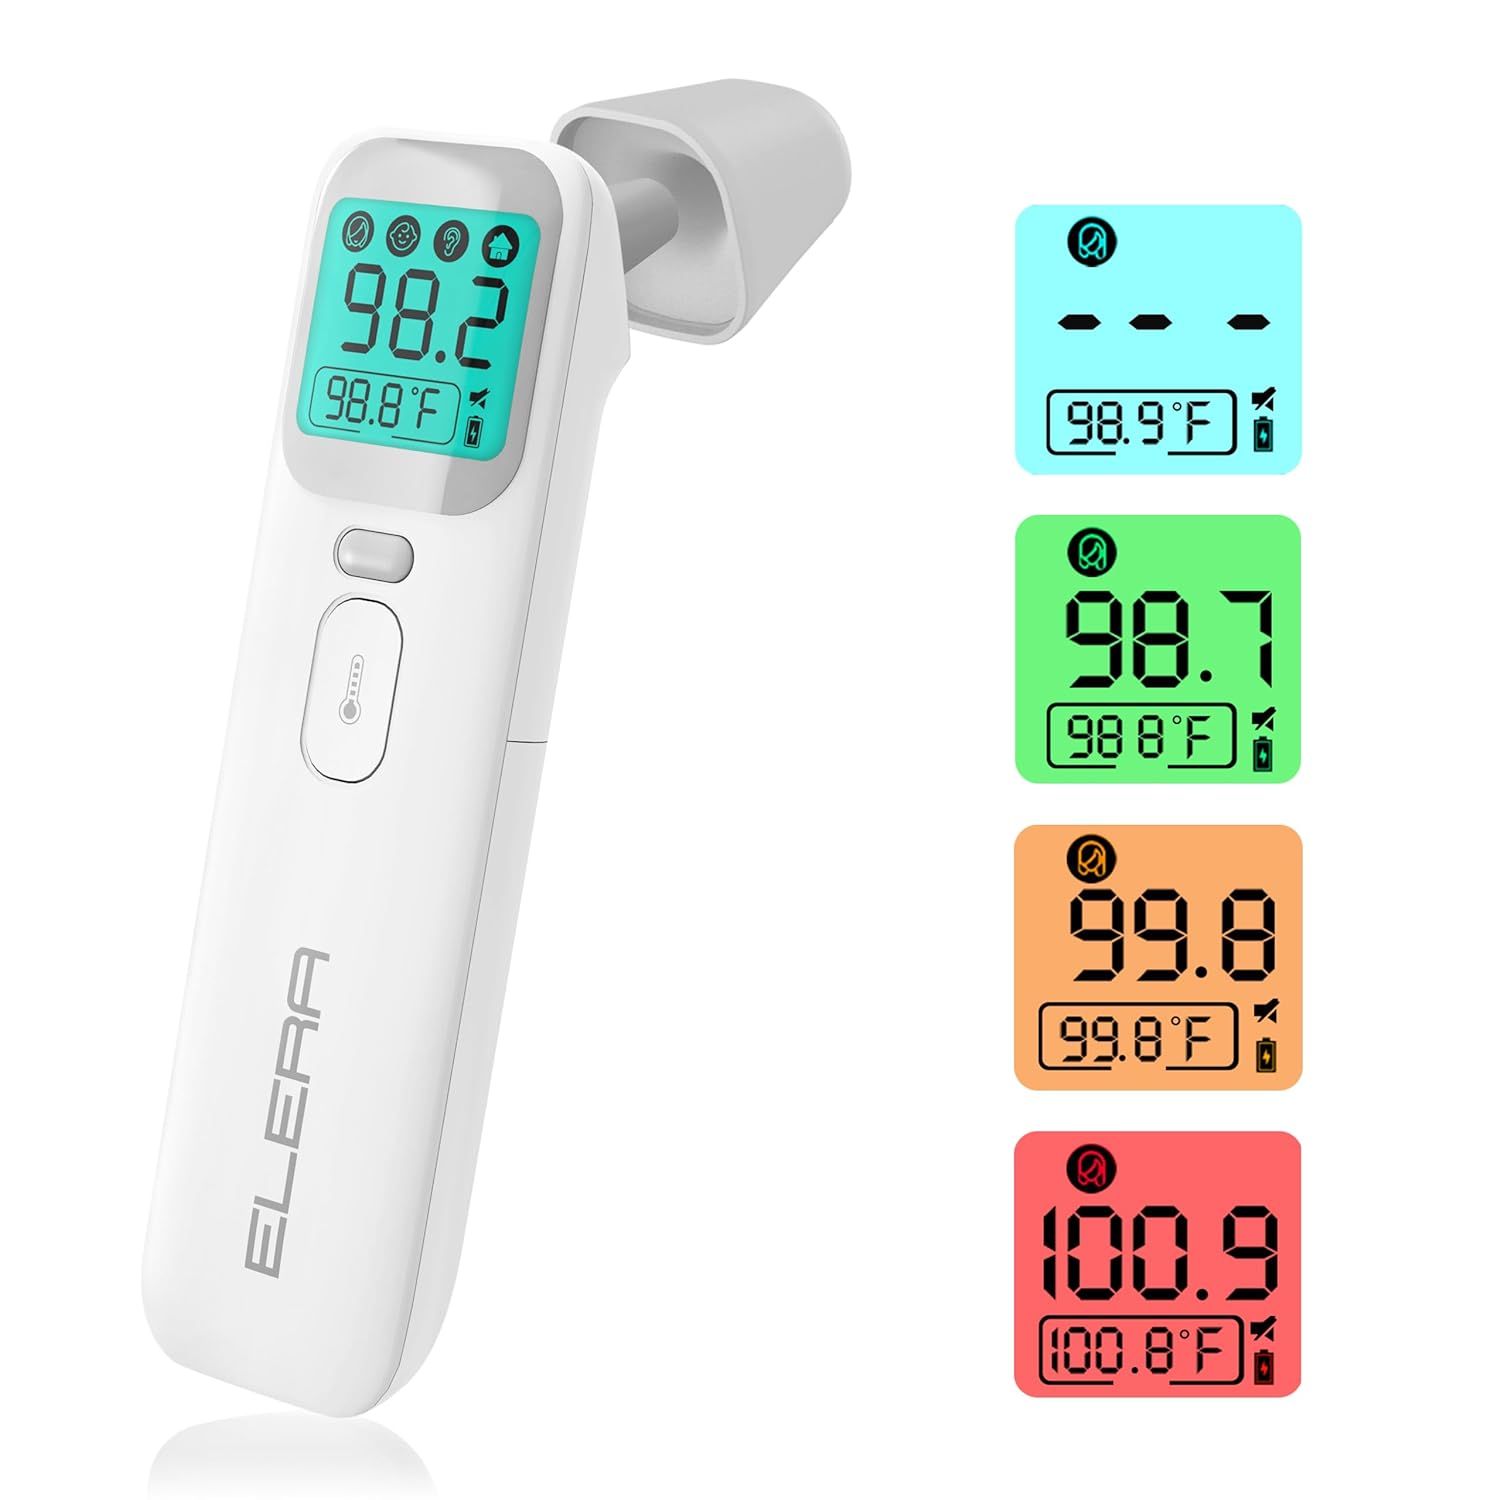 ELERA Baby Thermometer - Ear Thermometer for Kids, Infants, and Adults, Digital Precision with Quick 1-Second Measurement, 4-in-1 Non-Contact Design with Memory Function